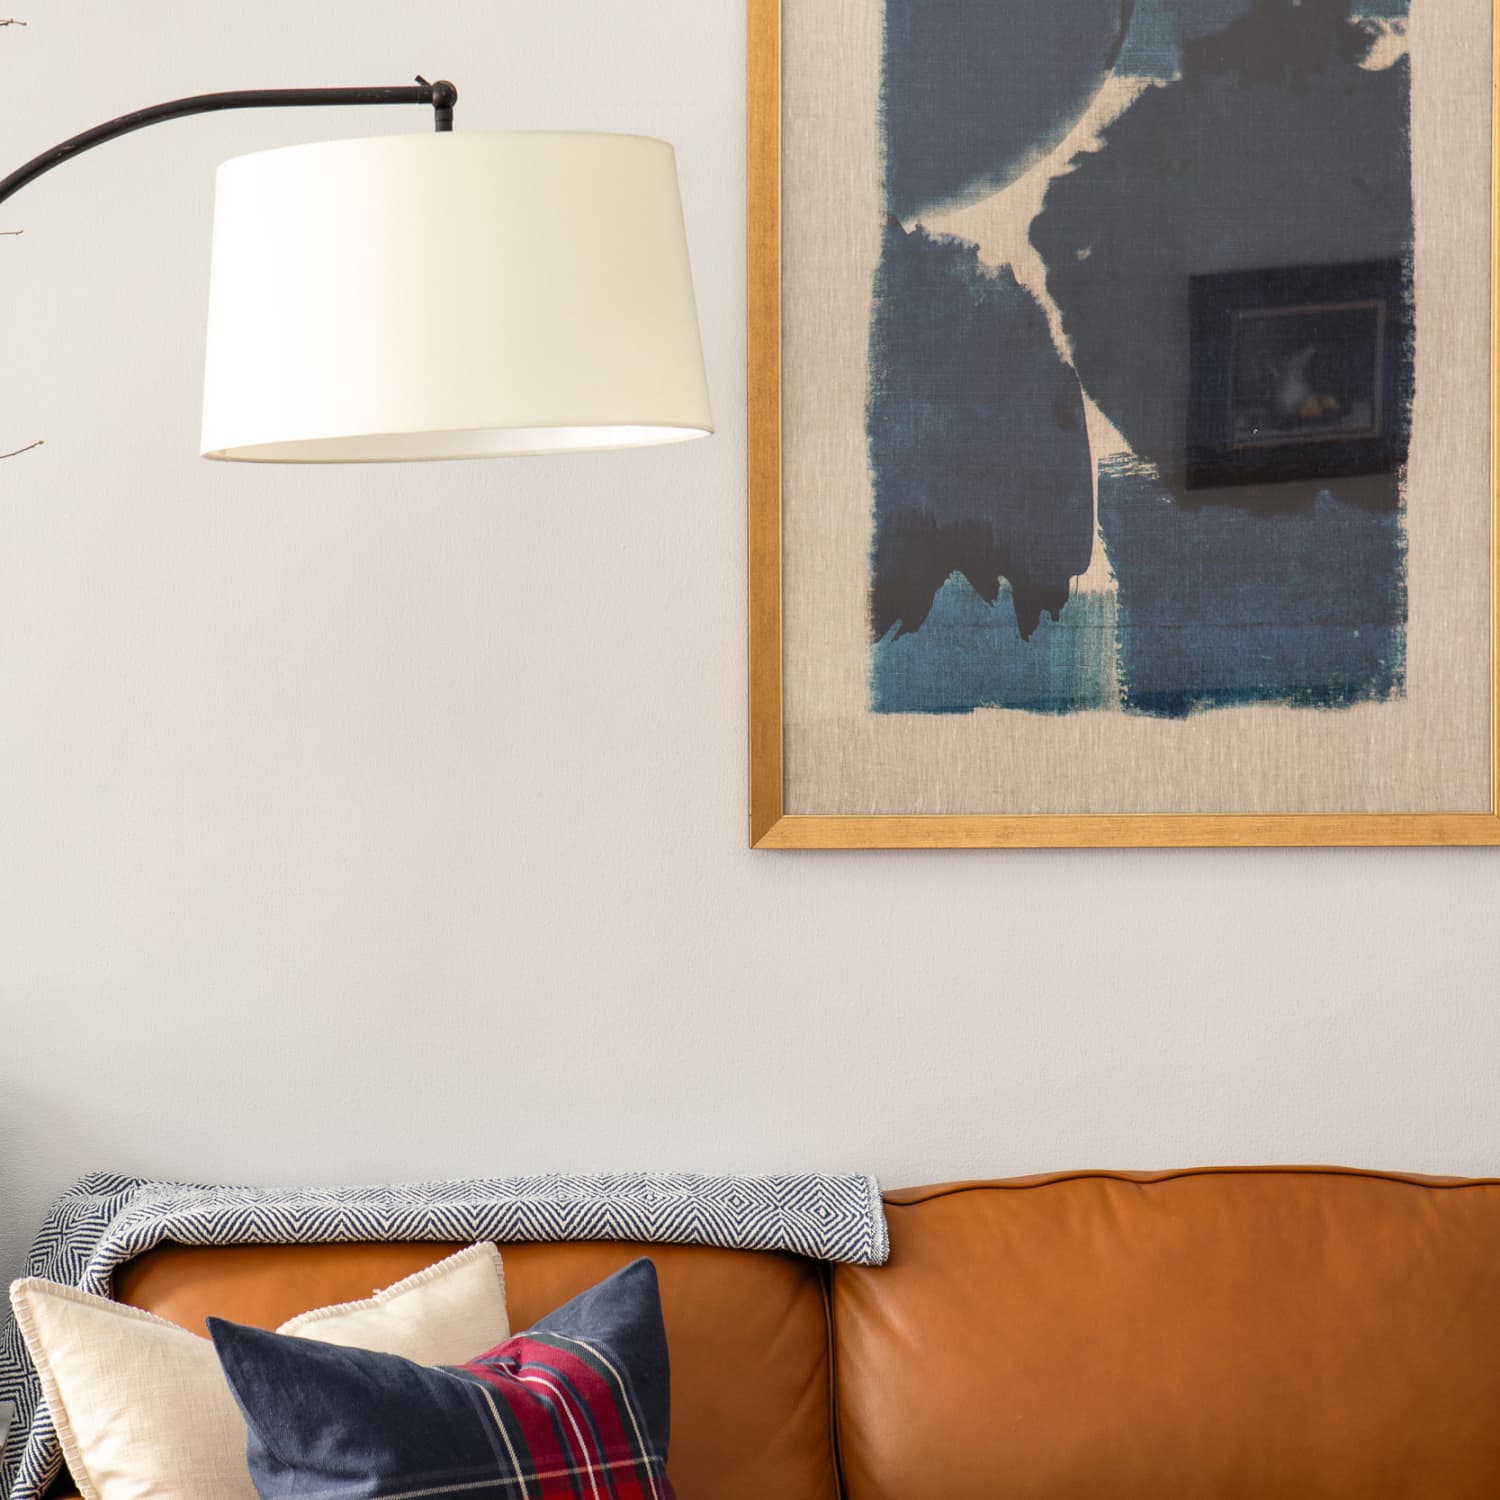 The 9 Best Lamps For Dark Rooms | Apartment Therapy